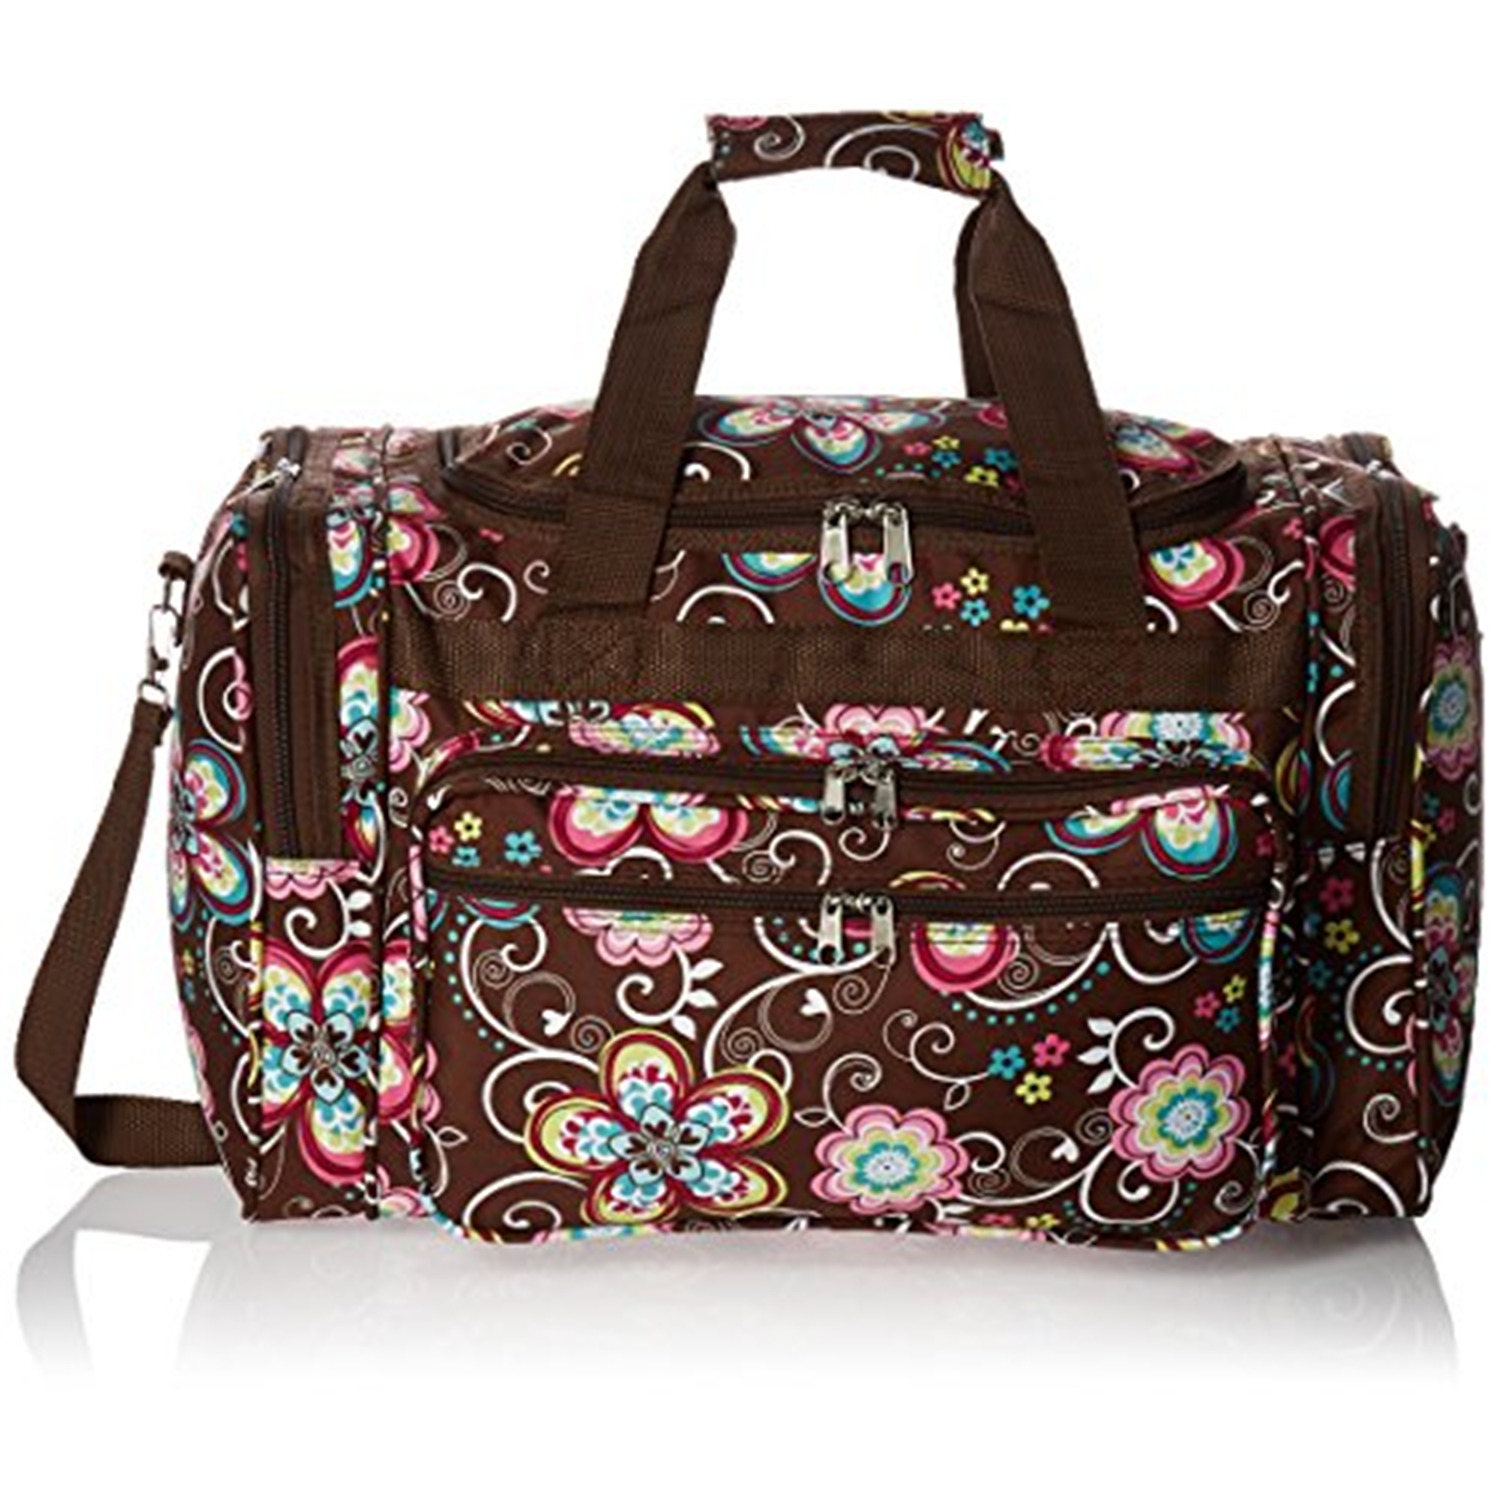 World Traveler 19-inch Carry-On Shoulder Duffel Bag - Brown Daisy - image 1 of 2